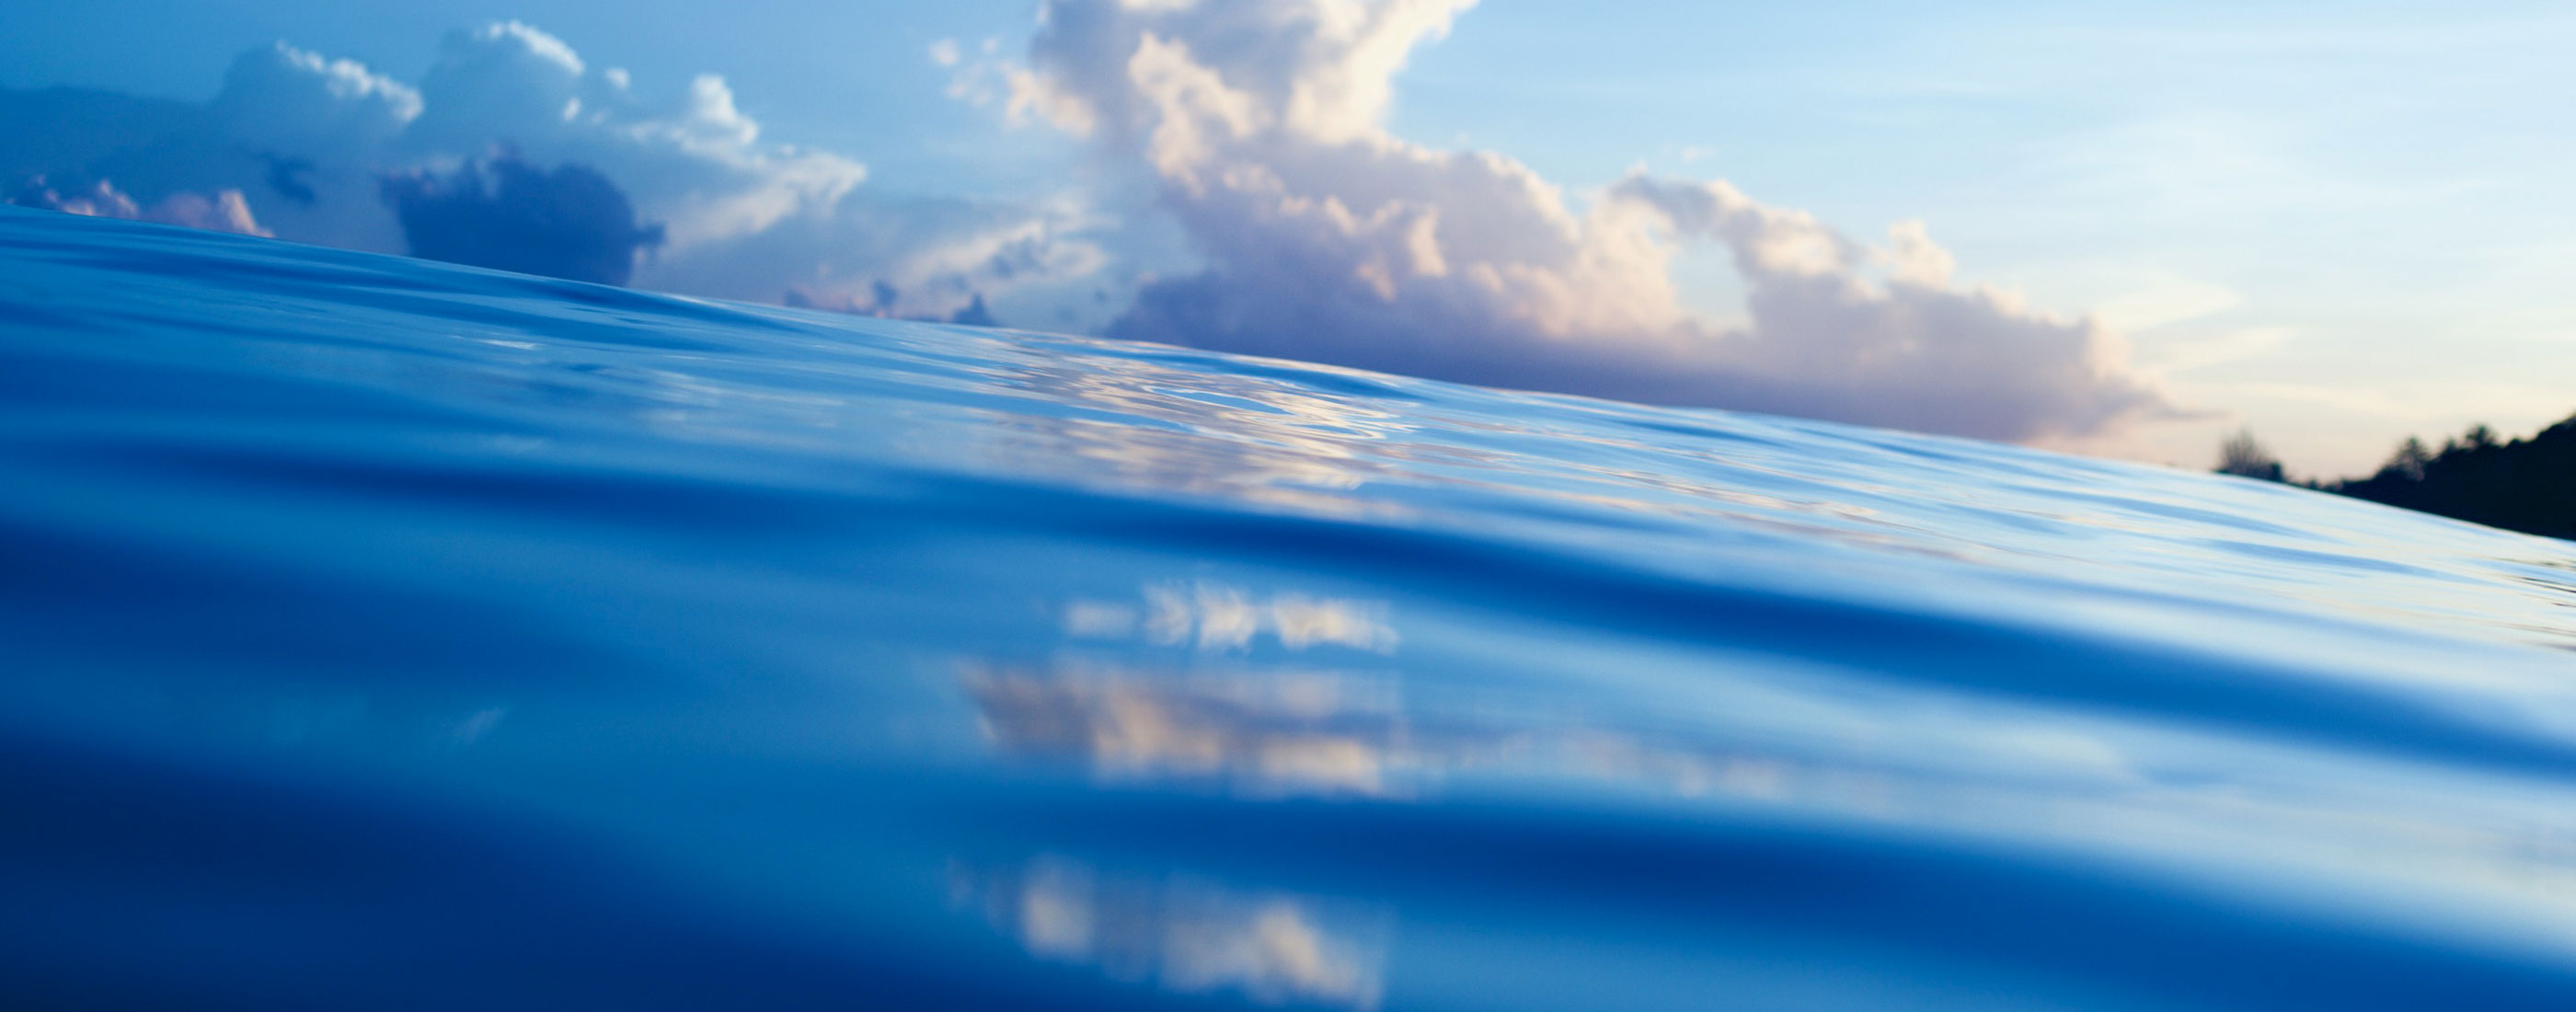 Ocean water surface with large clouds above the horizon in the background.